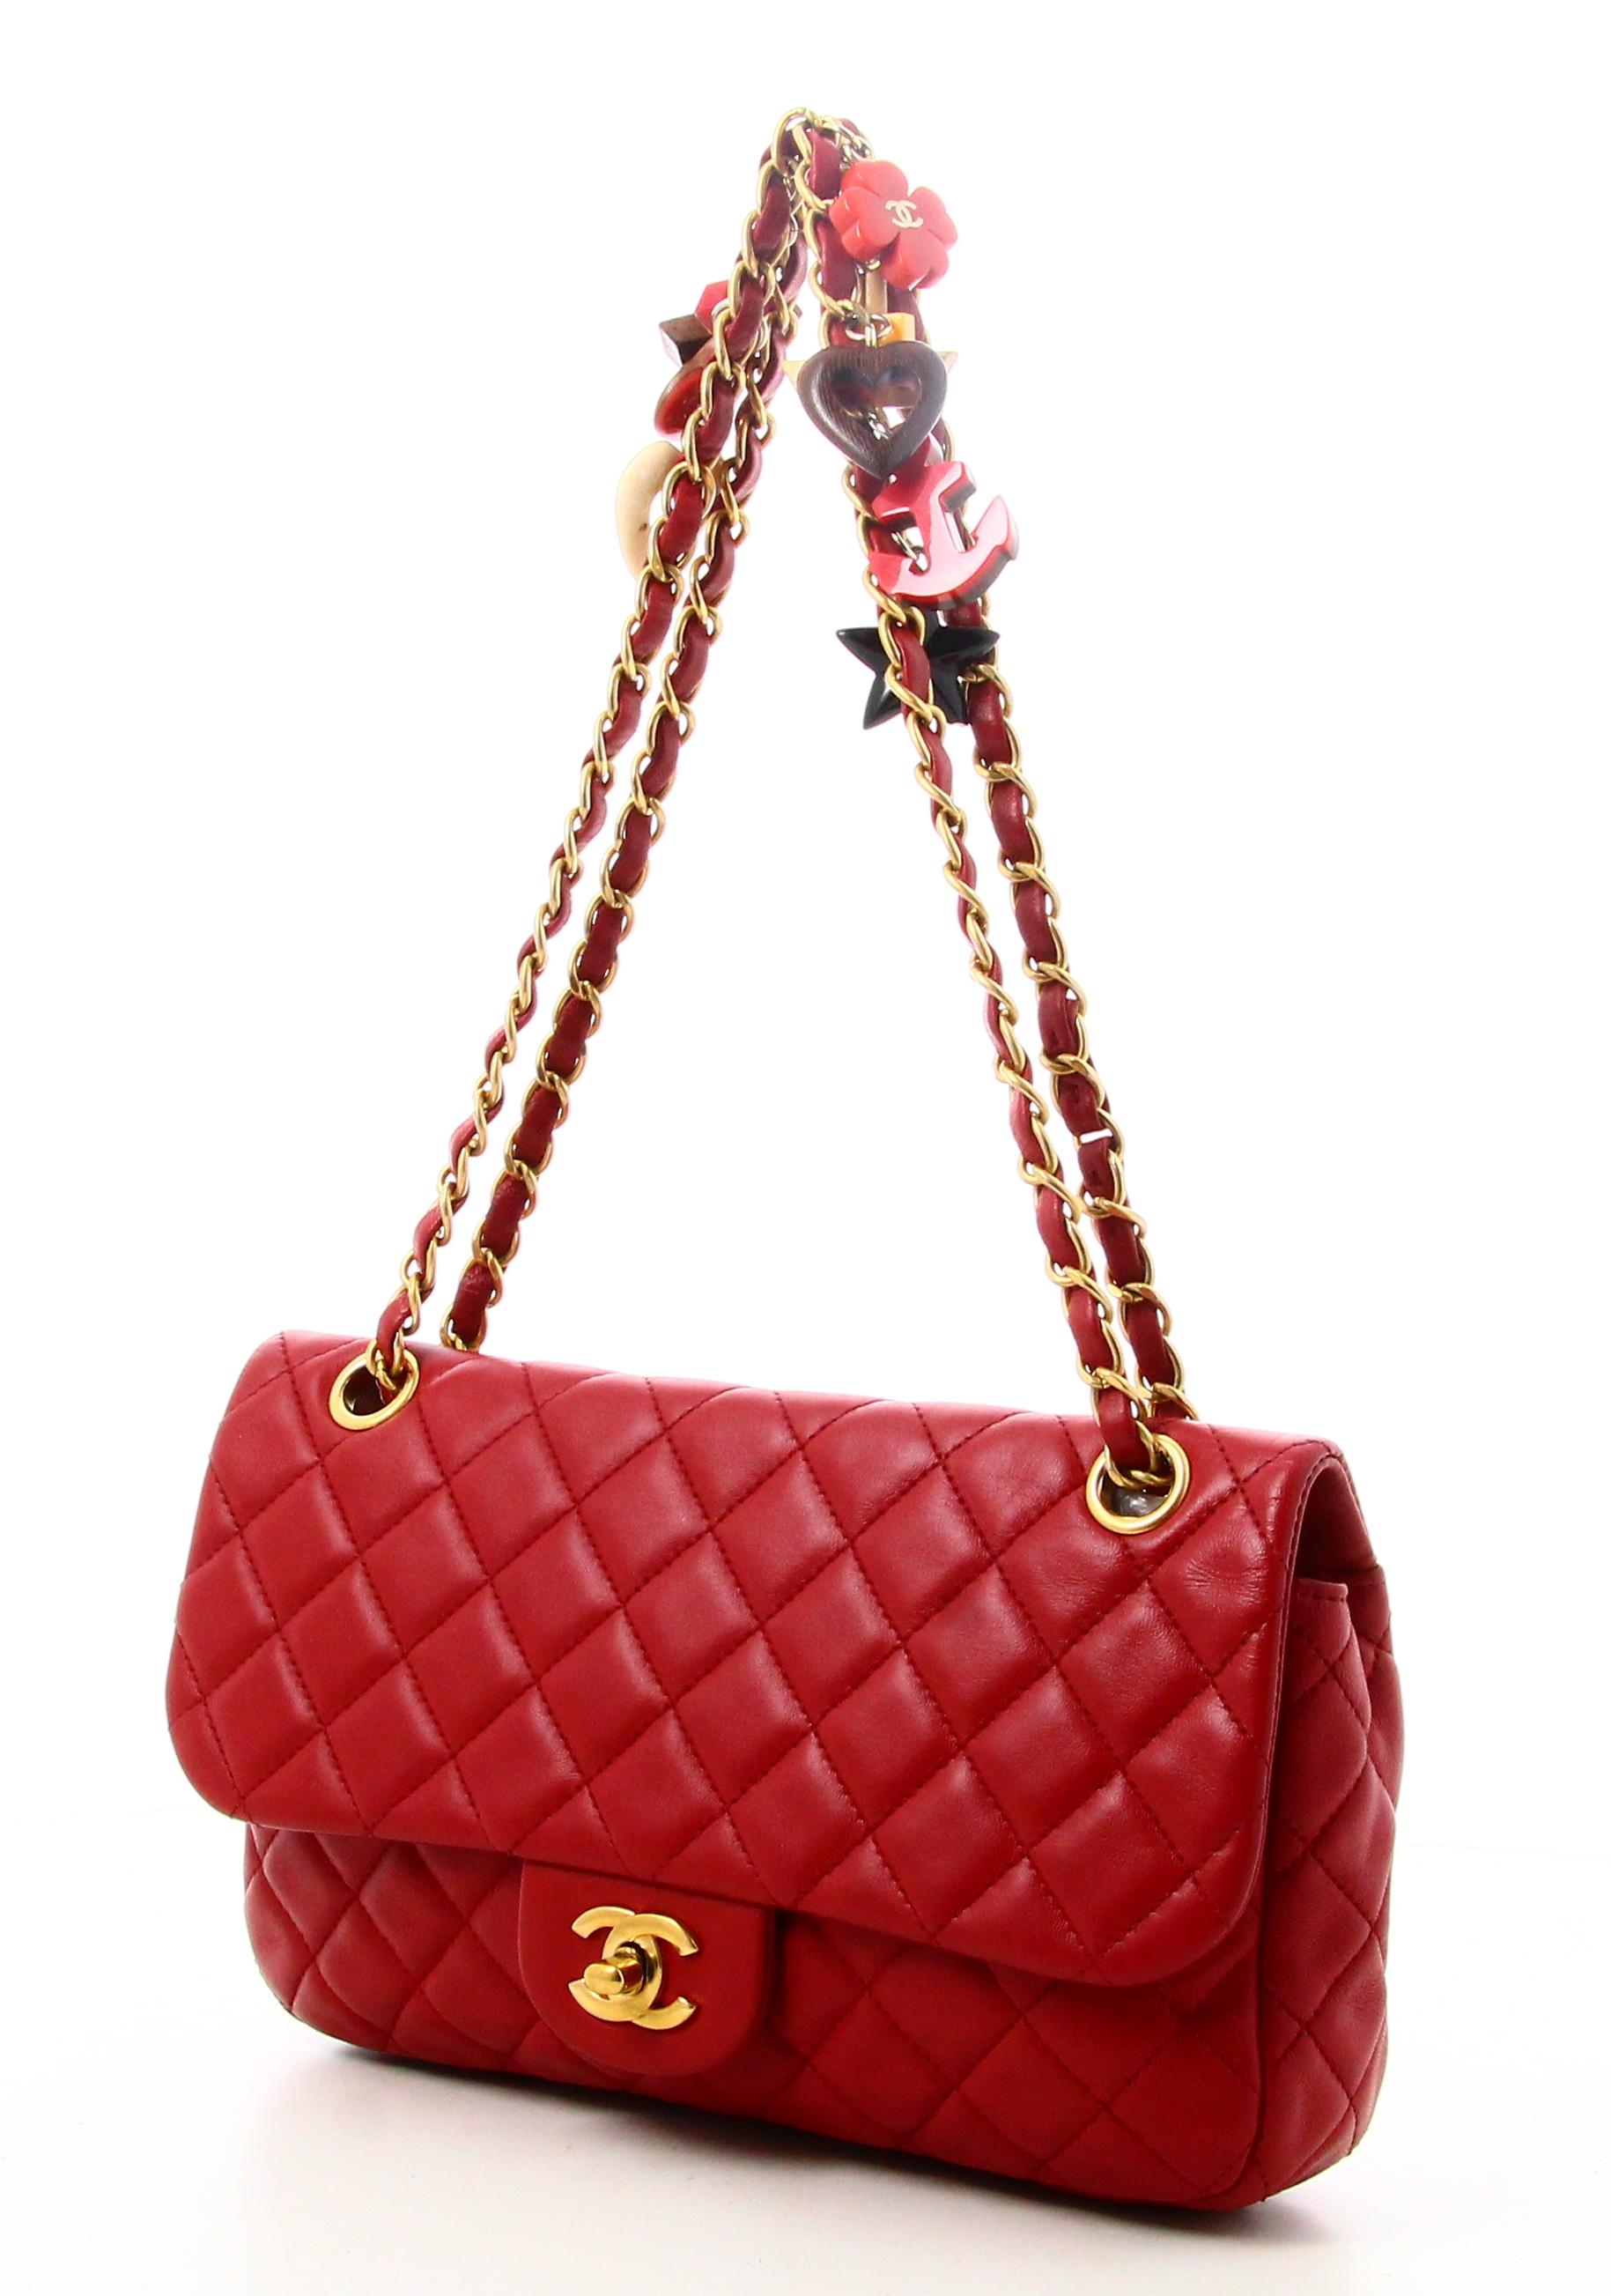 2010 Chanel Timeless Handbag Red Quilted Leather

- Very good condition. Shows slight signs of wear over time. 
- Chanel handbag 
- Red quilted leather
- Double Chain with different objects and shapes on the chains 
- interior: beige fabric plus